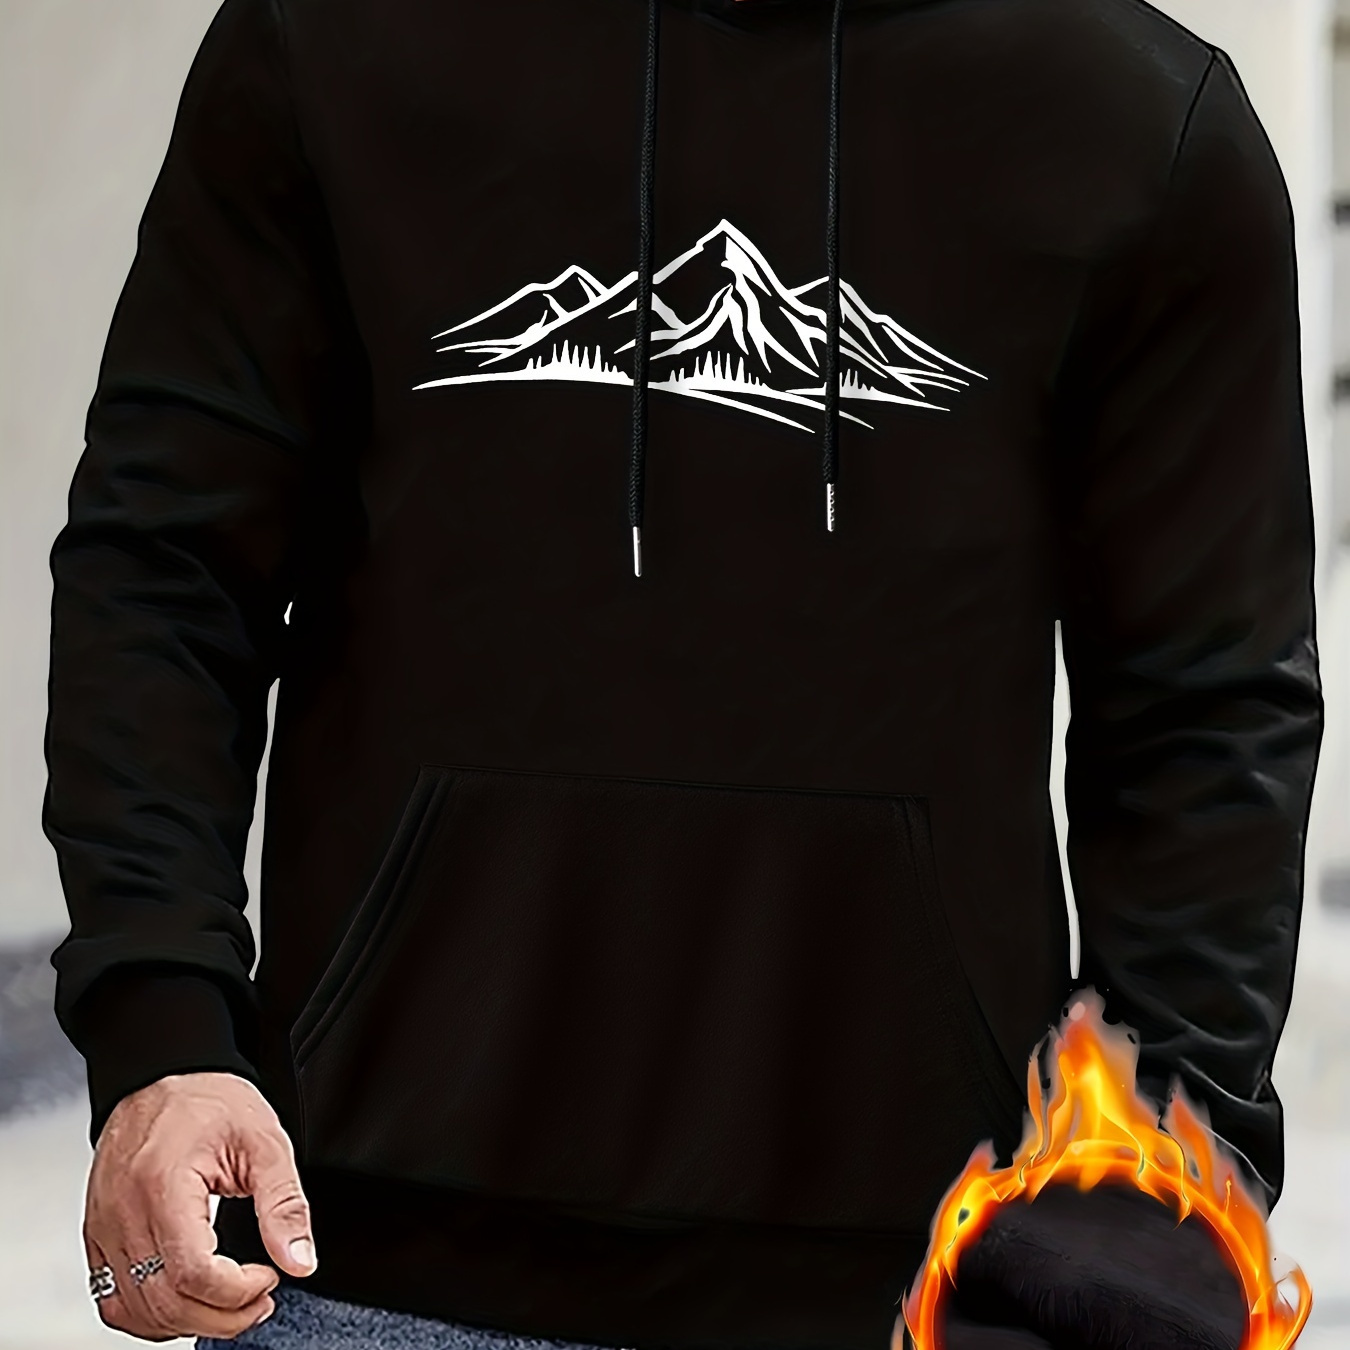 

Mountain Print Hoodie, Cool Hoodies For Men, Men's Casual Pullover Hooded Sweatshirt With Kangaroo Pocket Streetwear For Winter Fall, As Gifts